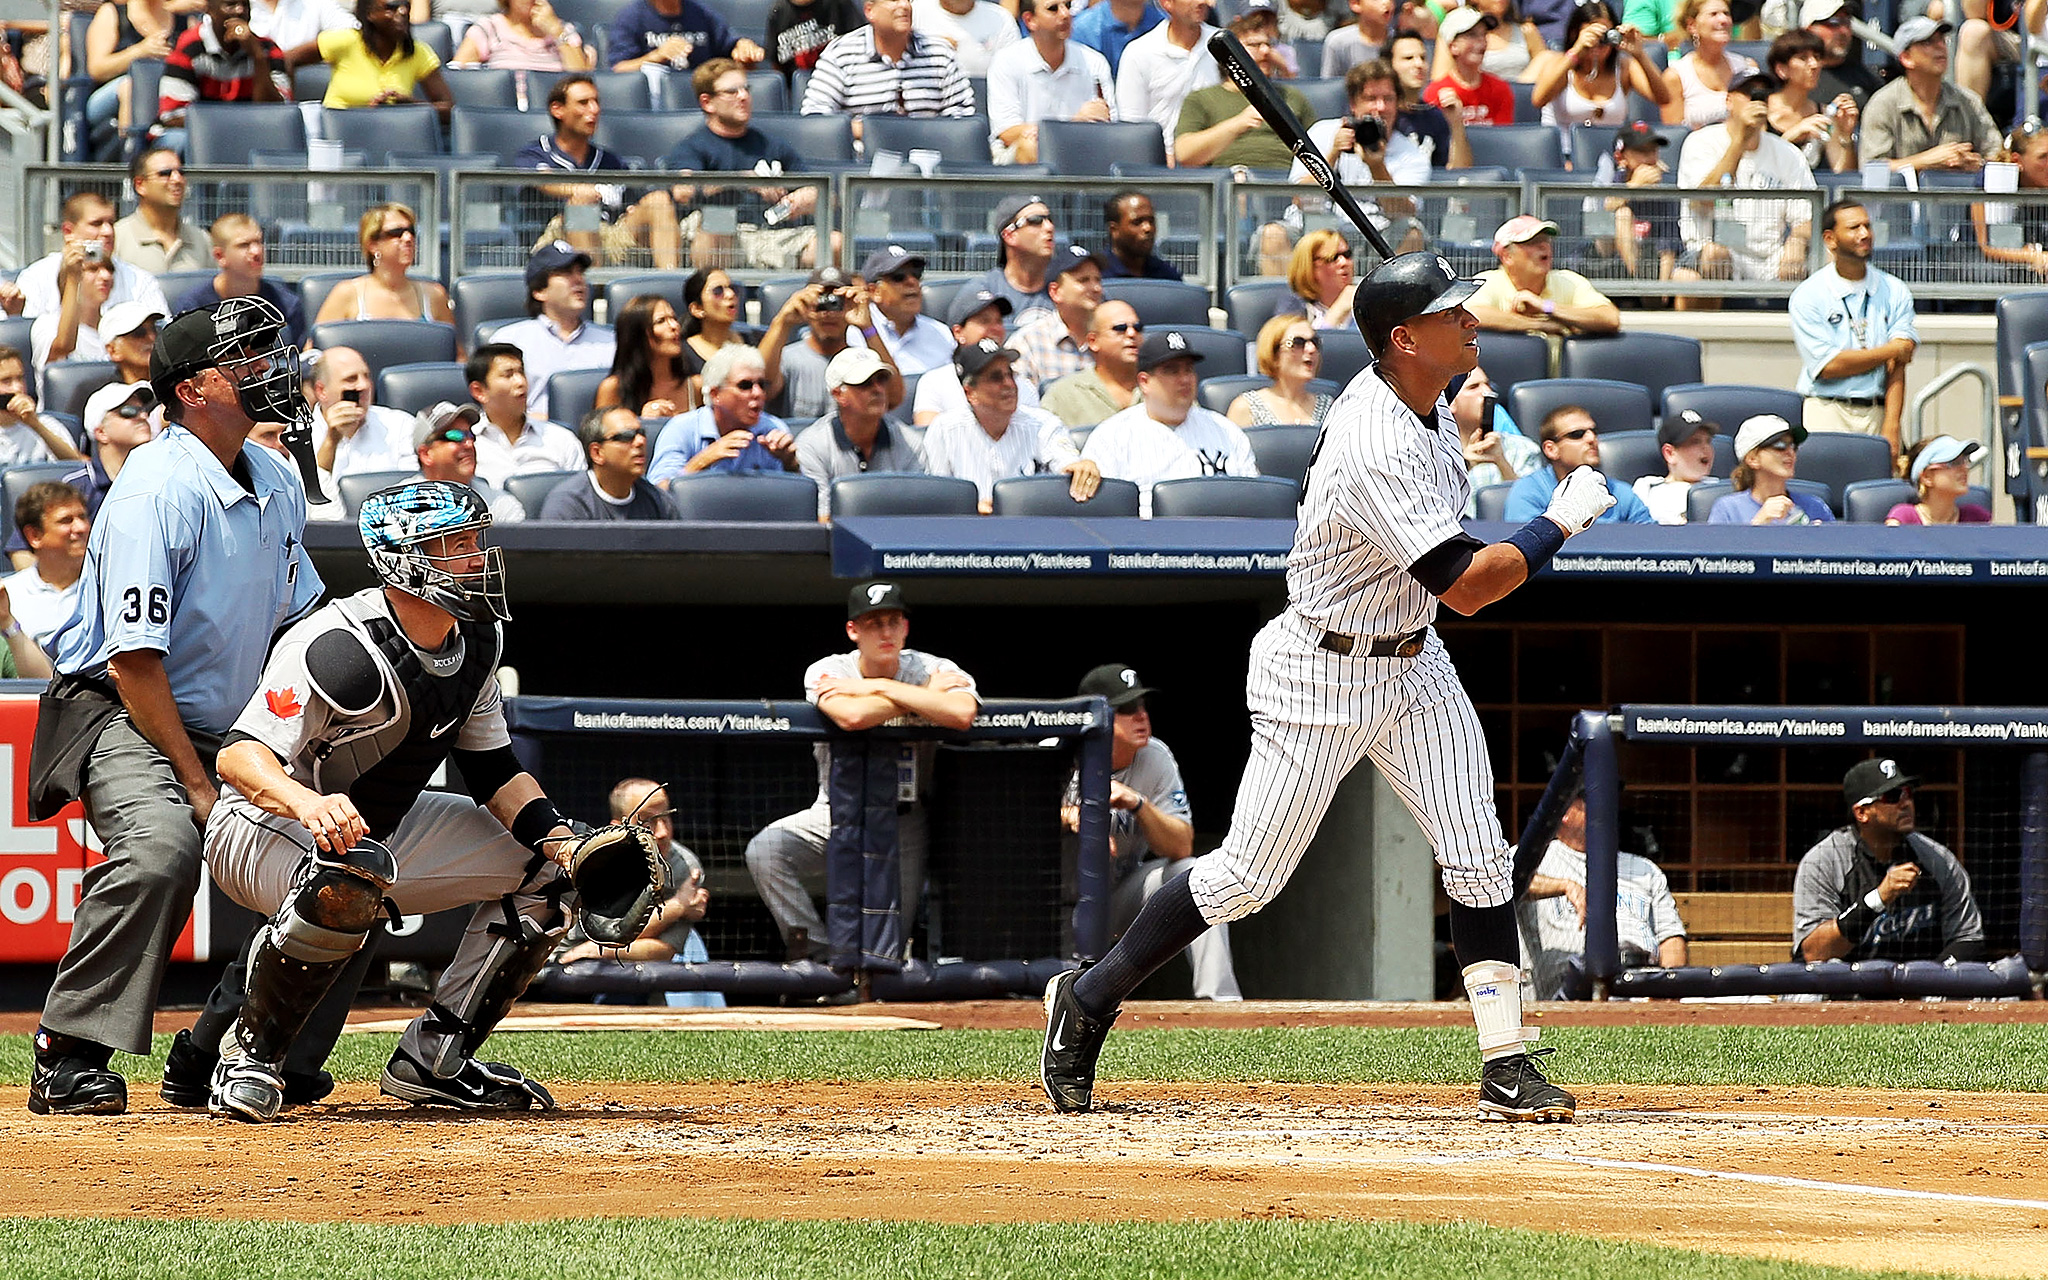 A-Rod's Highs and Lows: The complicated career of Alex Rodriguez - ESPN